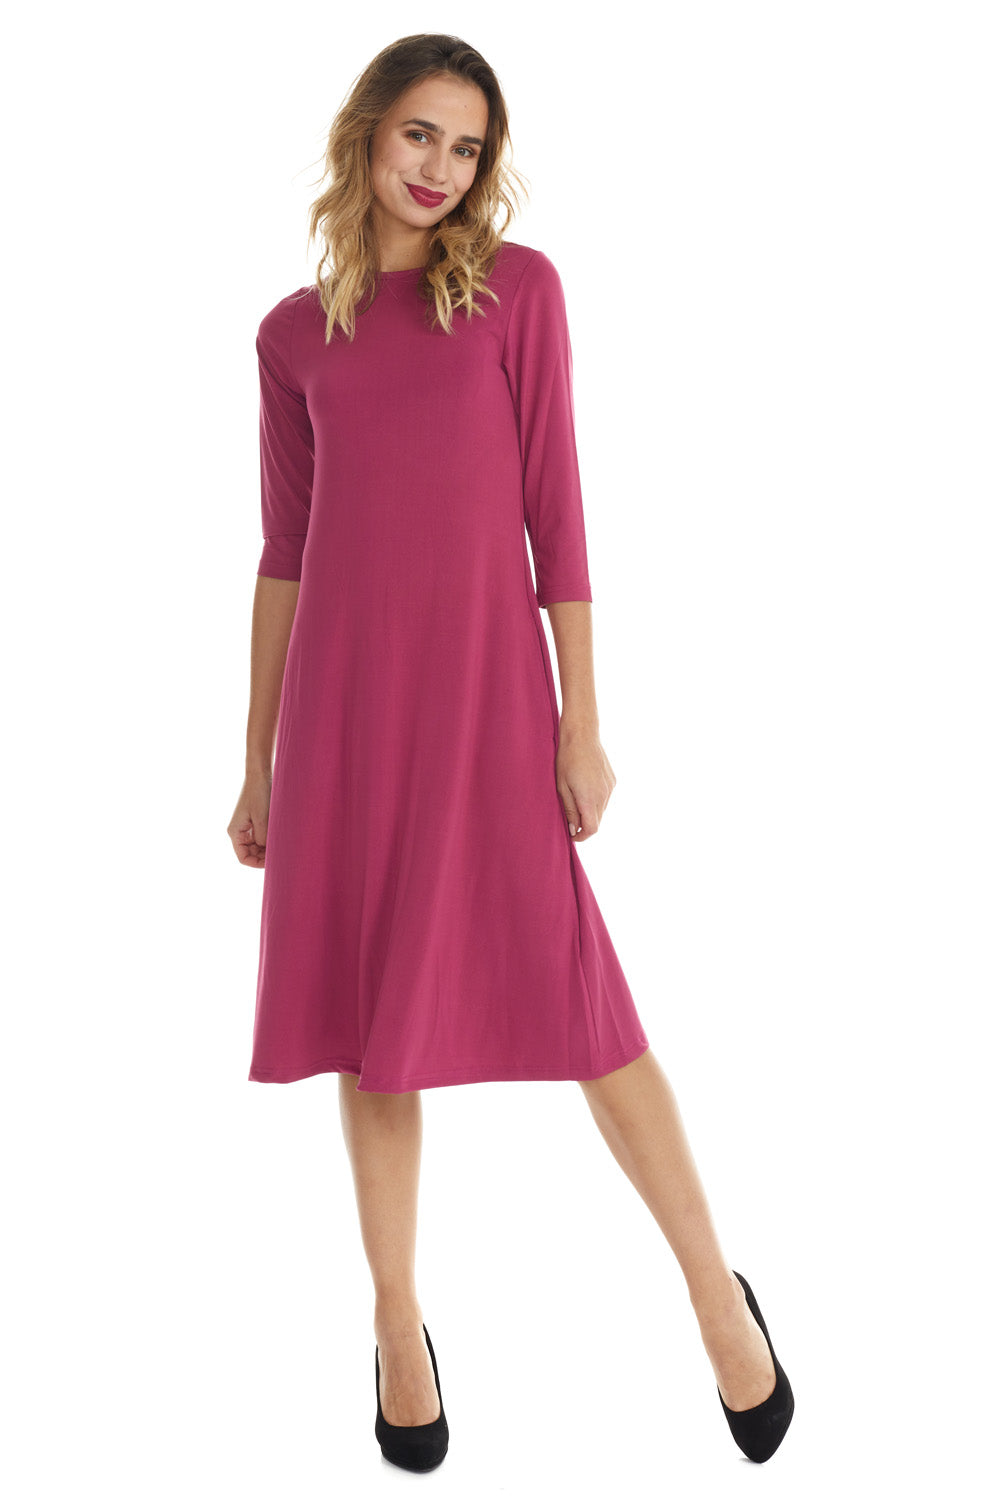 pink flary below knee length 3/4 sleeve crew neck modest tznius a-line dress with pockets